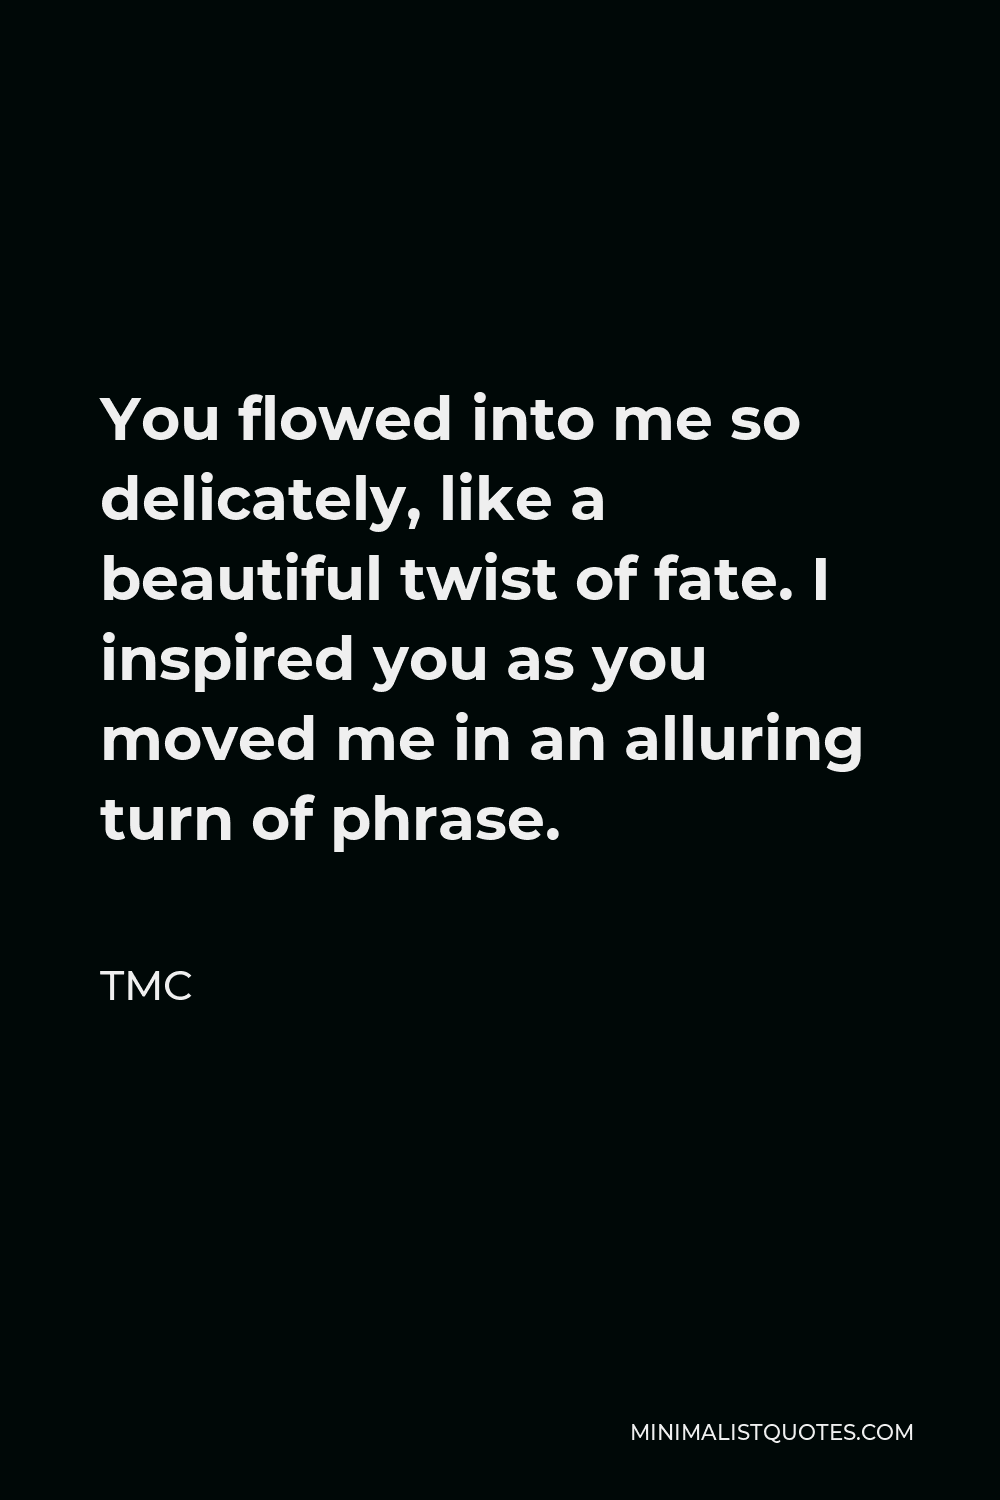 TMC Quote - You flowed into me so delicately, like a beautiful twist of fate. I inspired you as you moved me in an alluring turn of phrase.